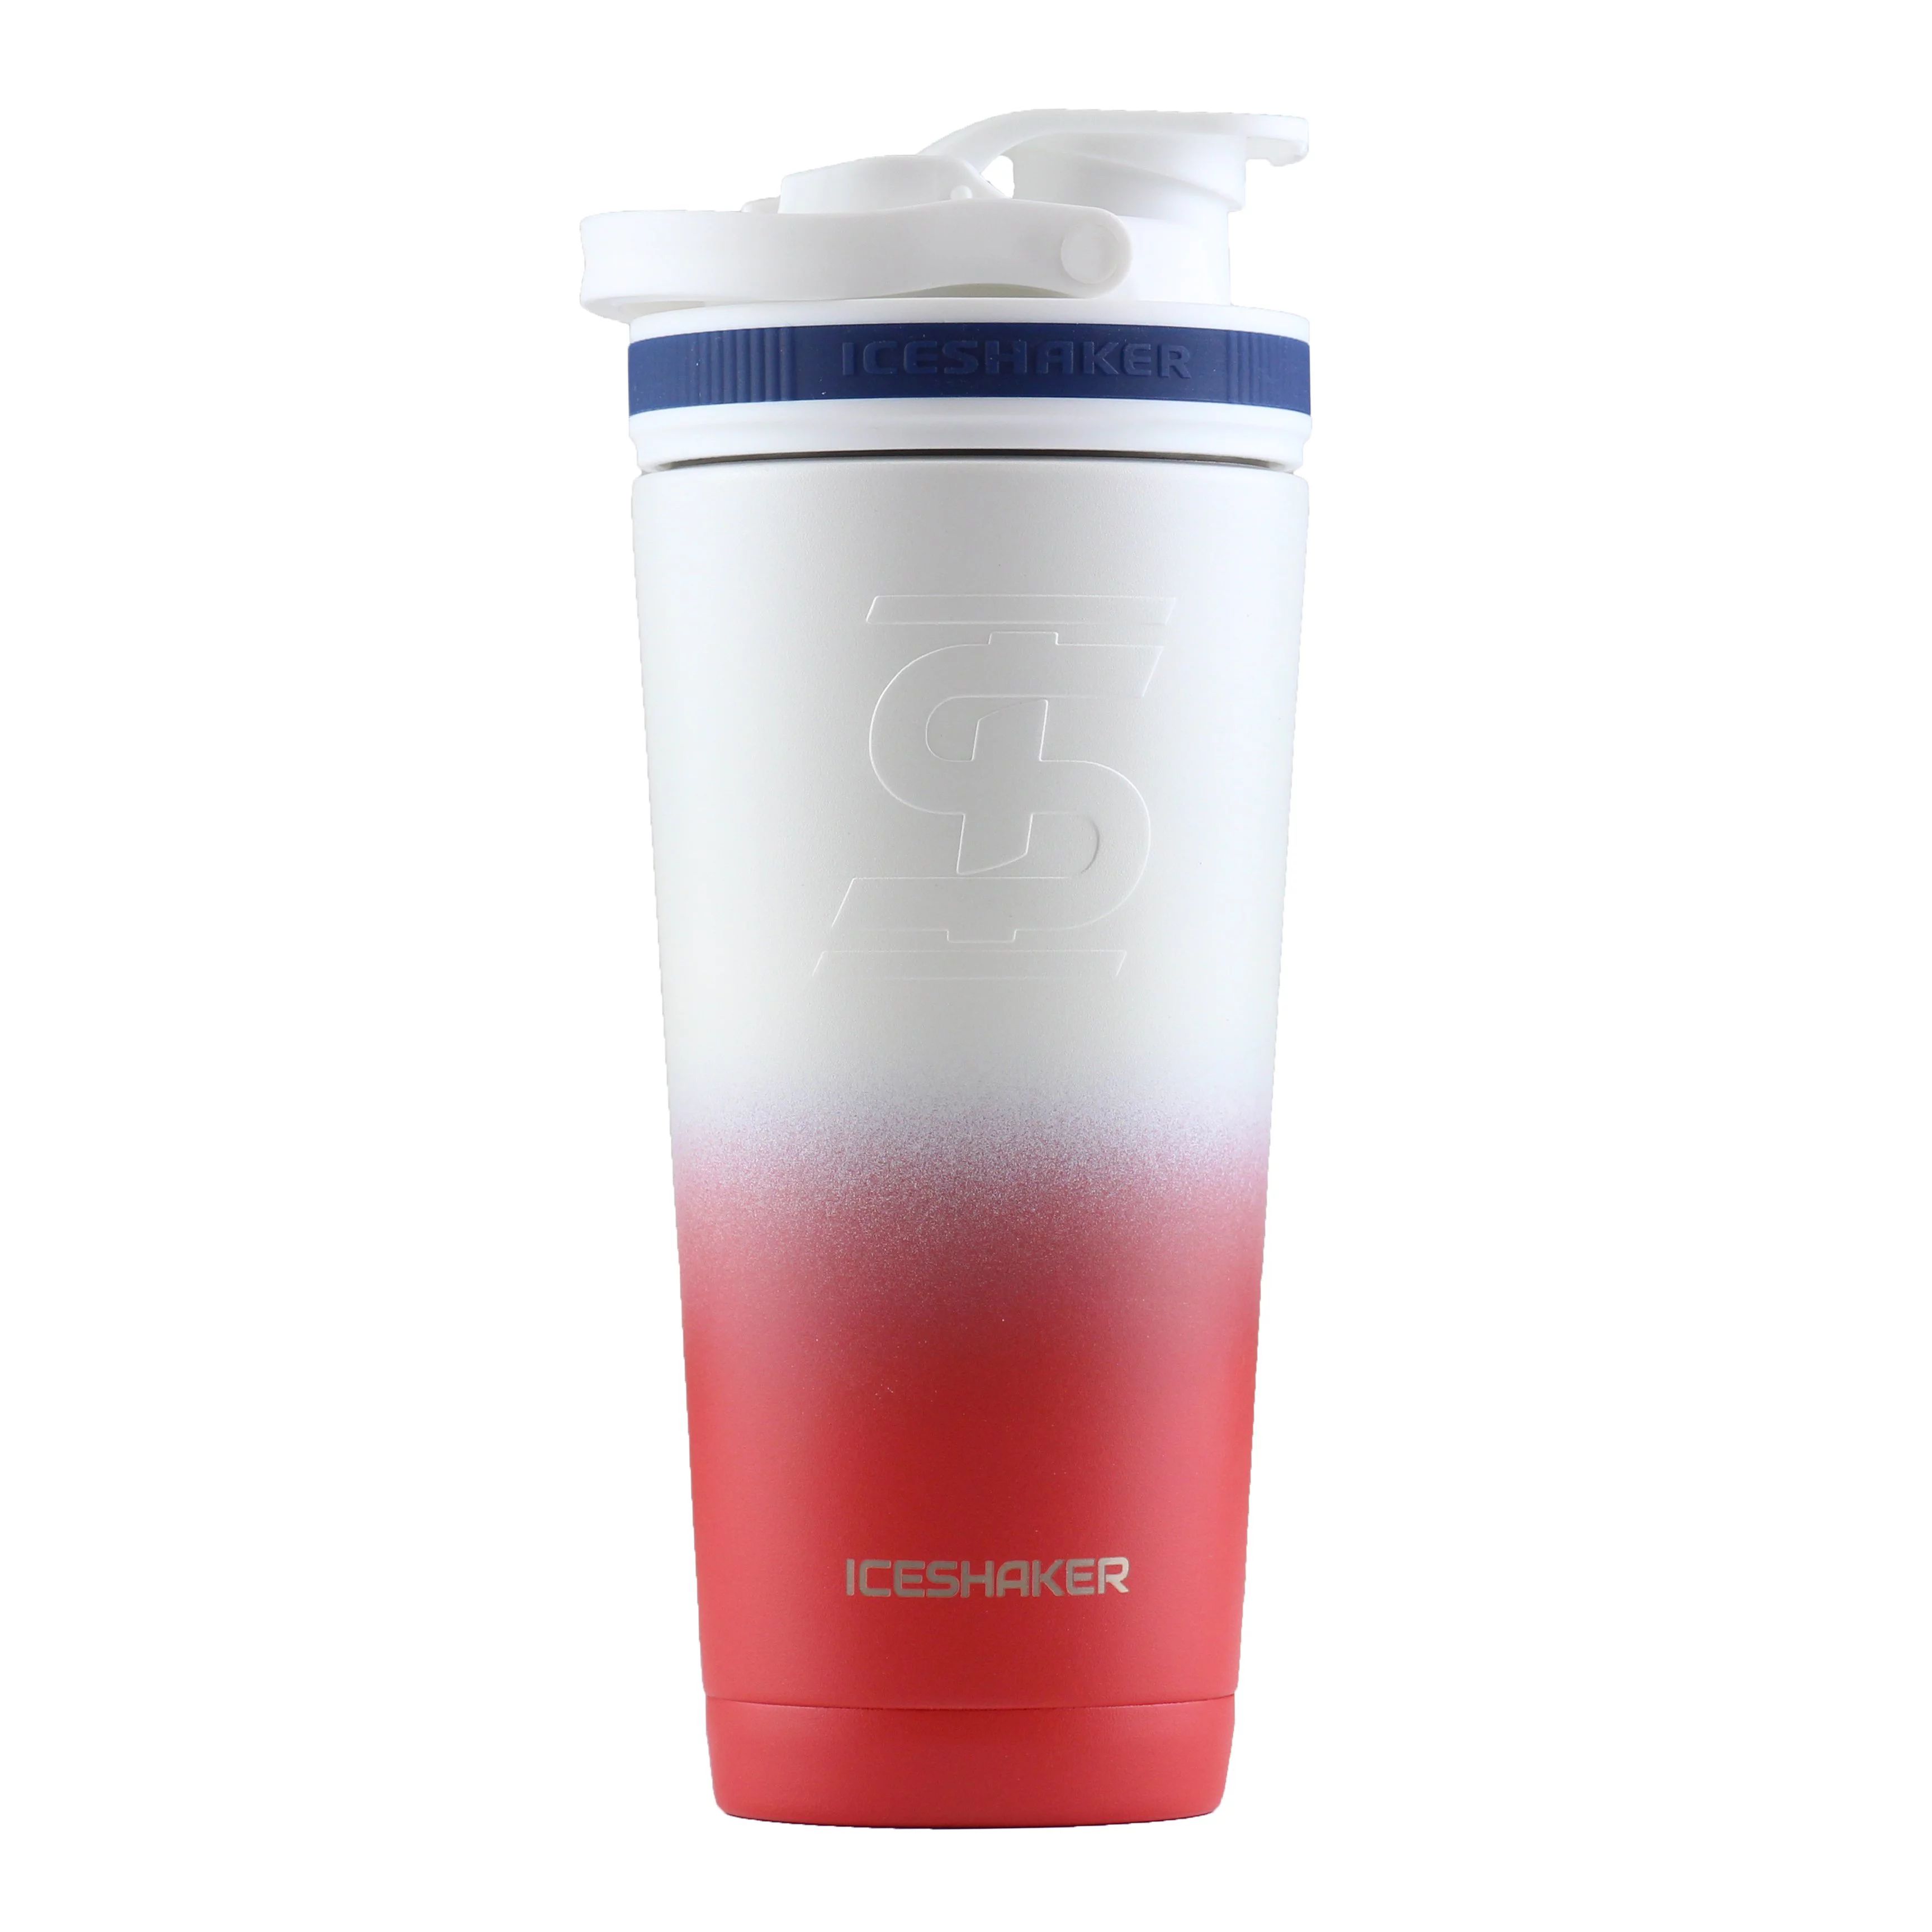 Ice Shaker Double Walled Vacuum Insulated Protein Shaker Bottle, Red-White-Blue, 26 oz. | Walmart (US)